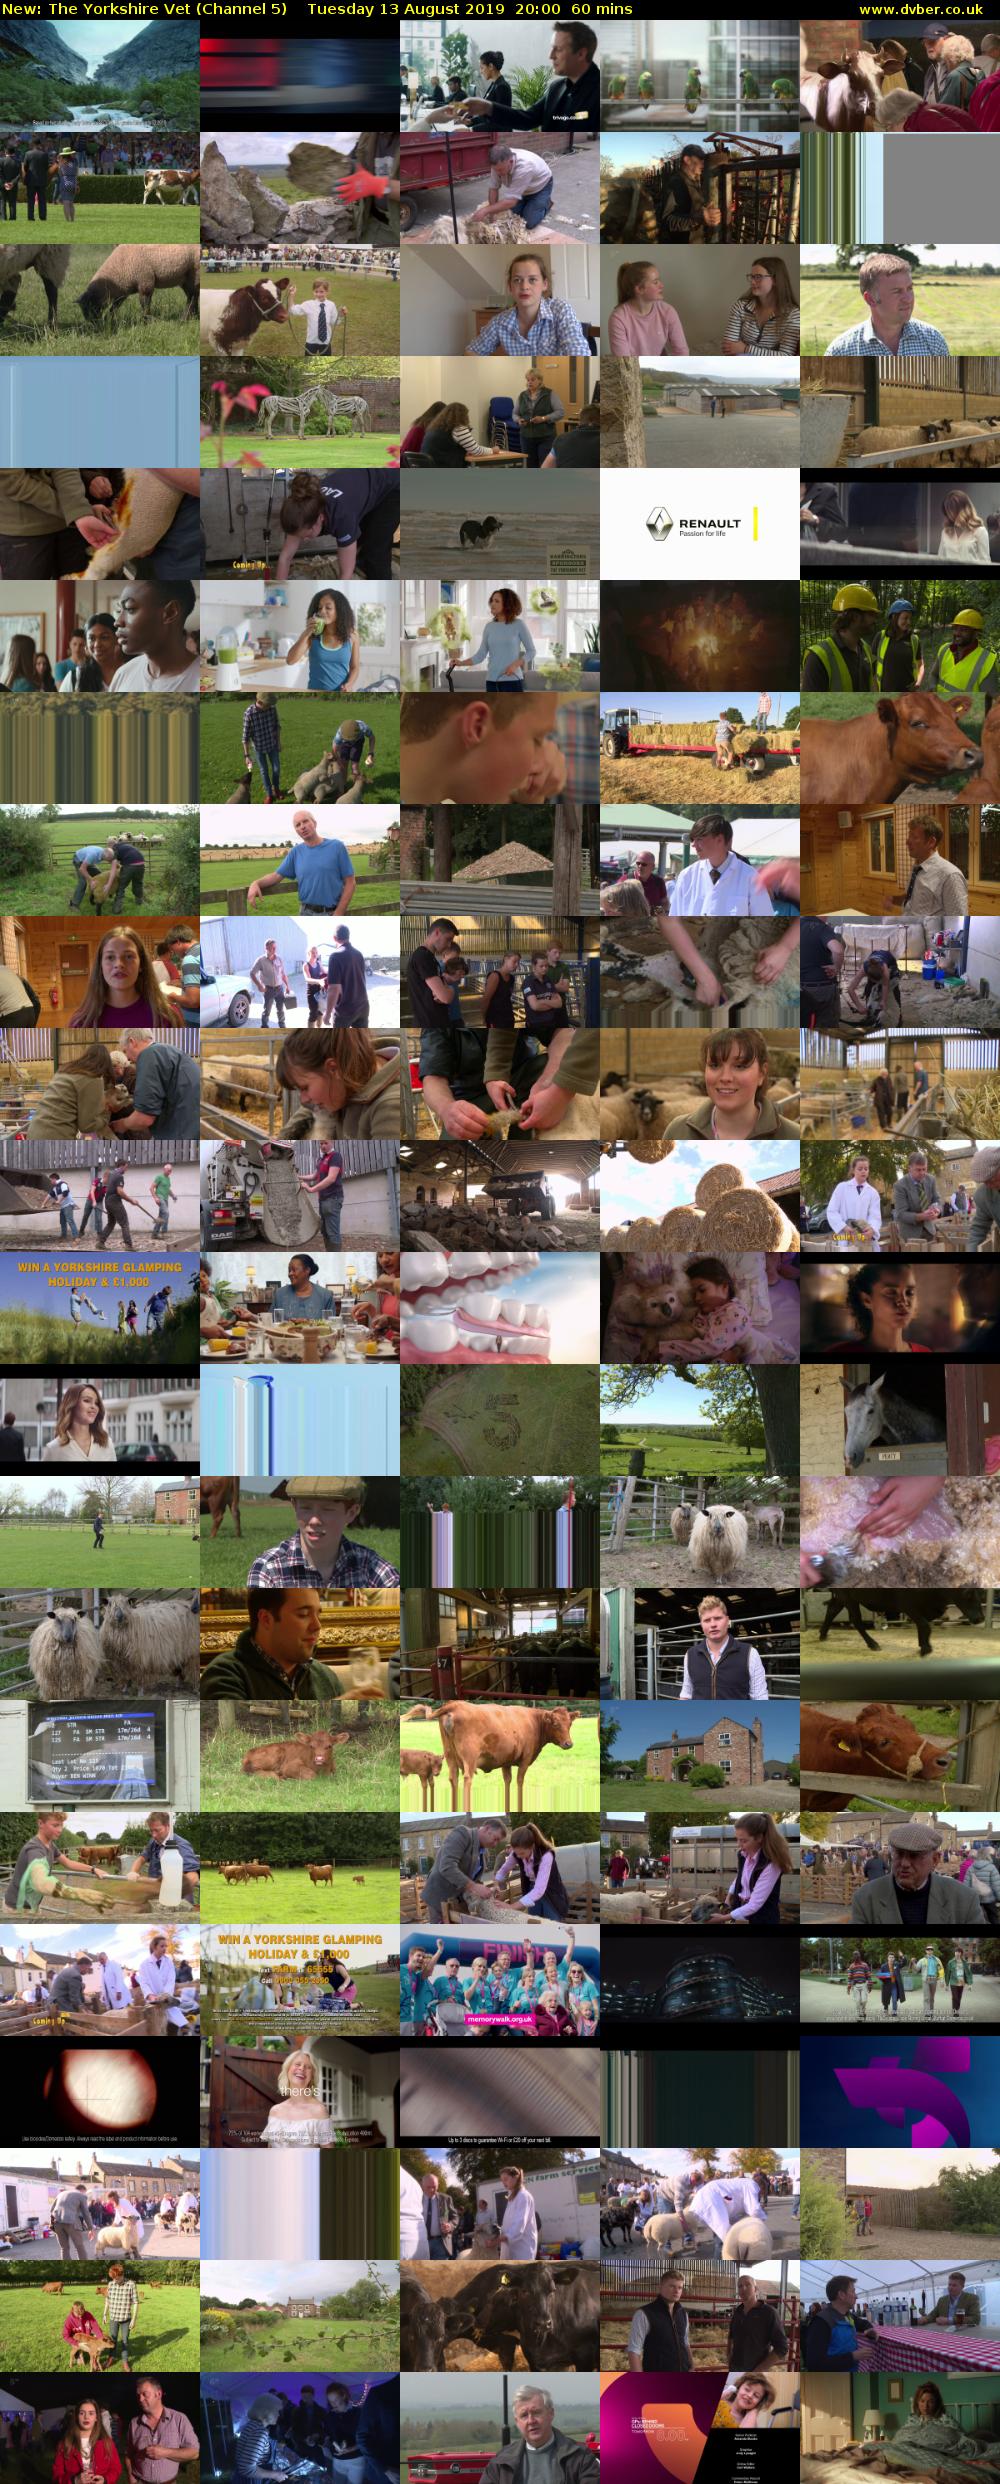 The Yorkshire Vet (Channel 5) Tuesday 13 August 2019 20:00 - 21:00